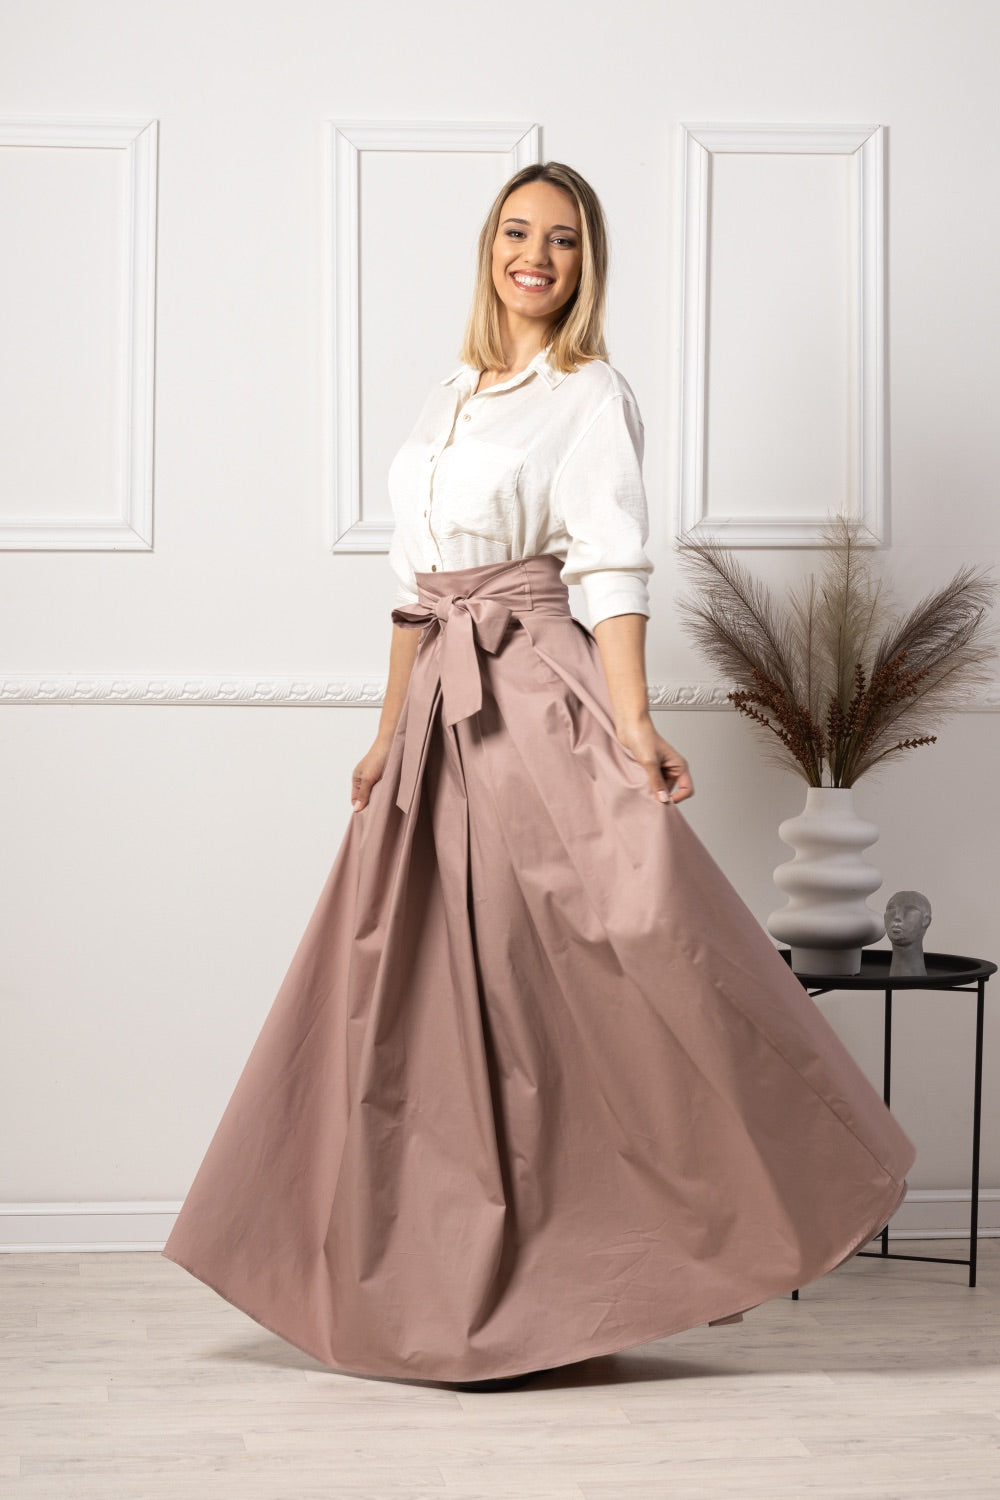 Black High Waist Pleated Maxi Skirt with different color top - from NikkaPlace | Effortless fashion for easy living